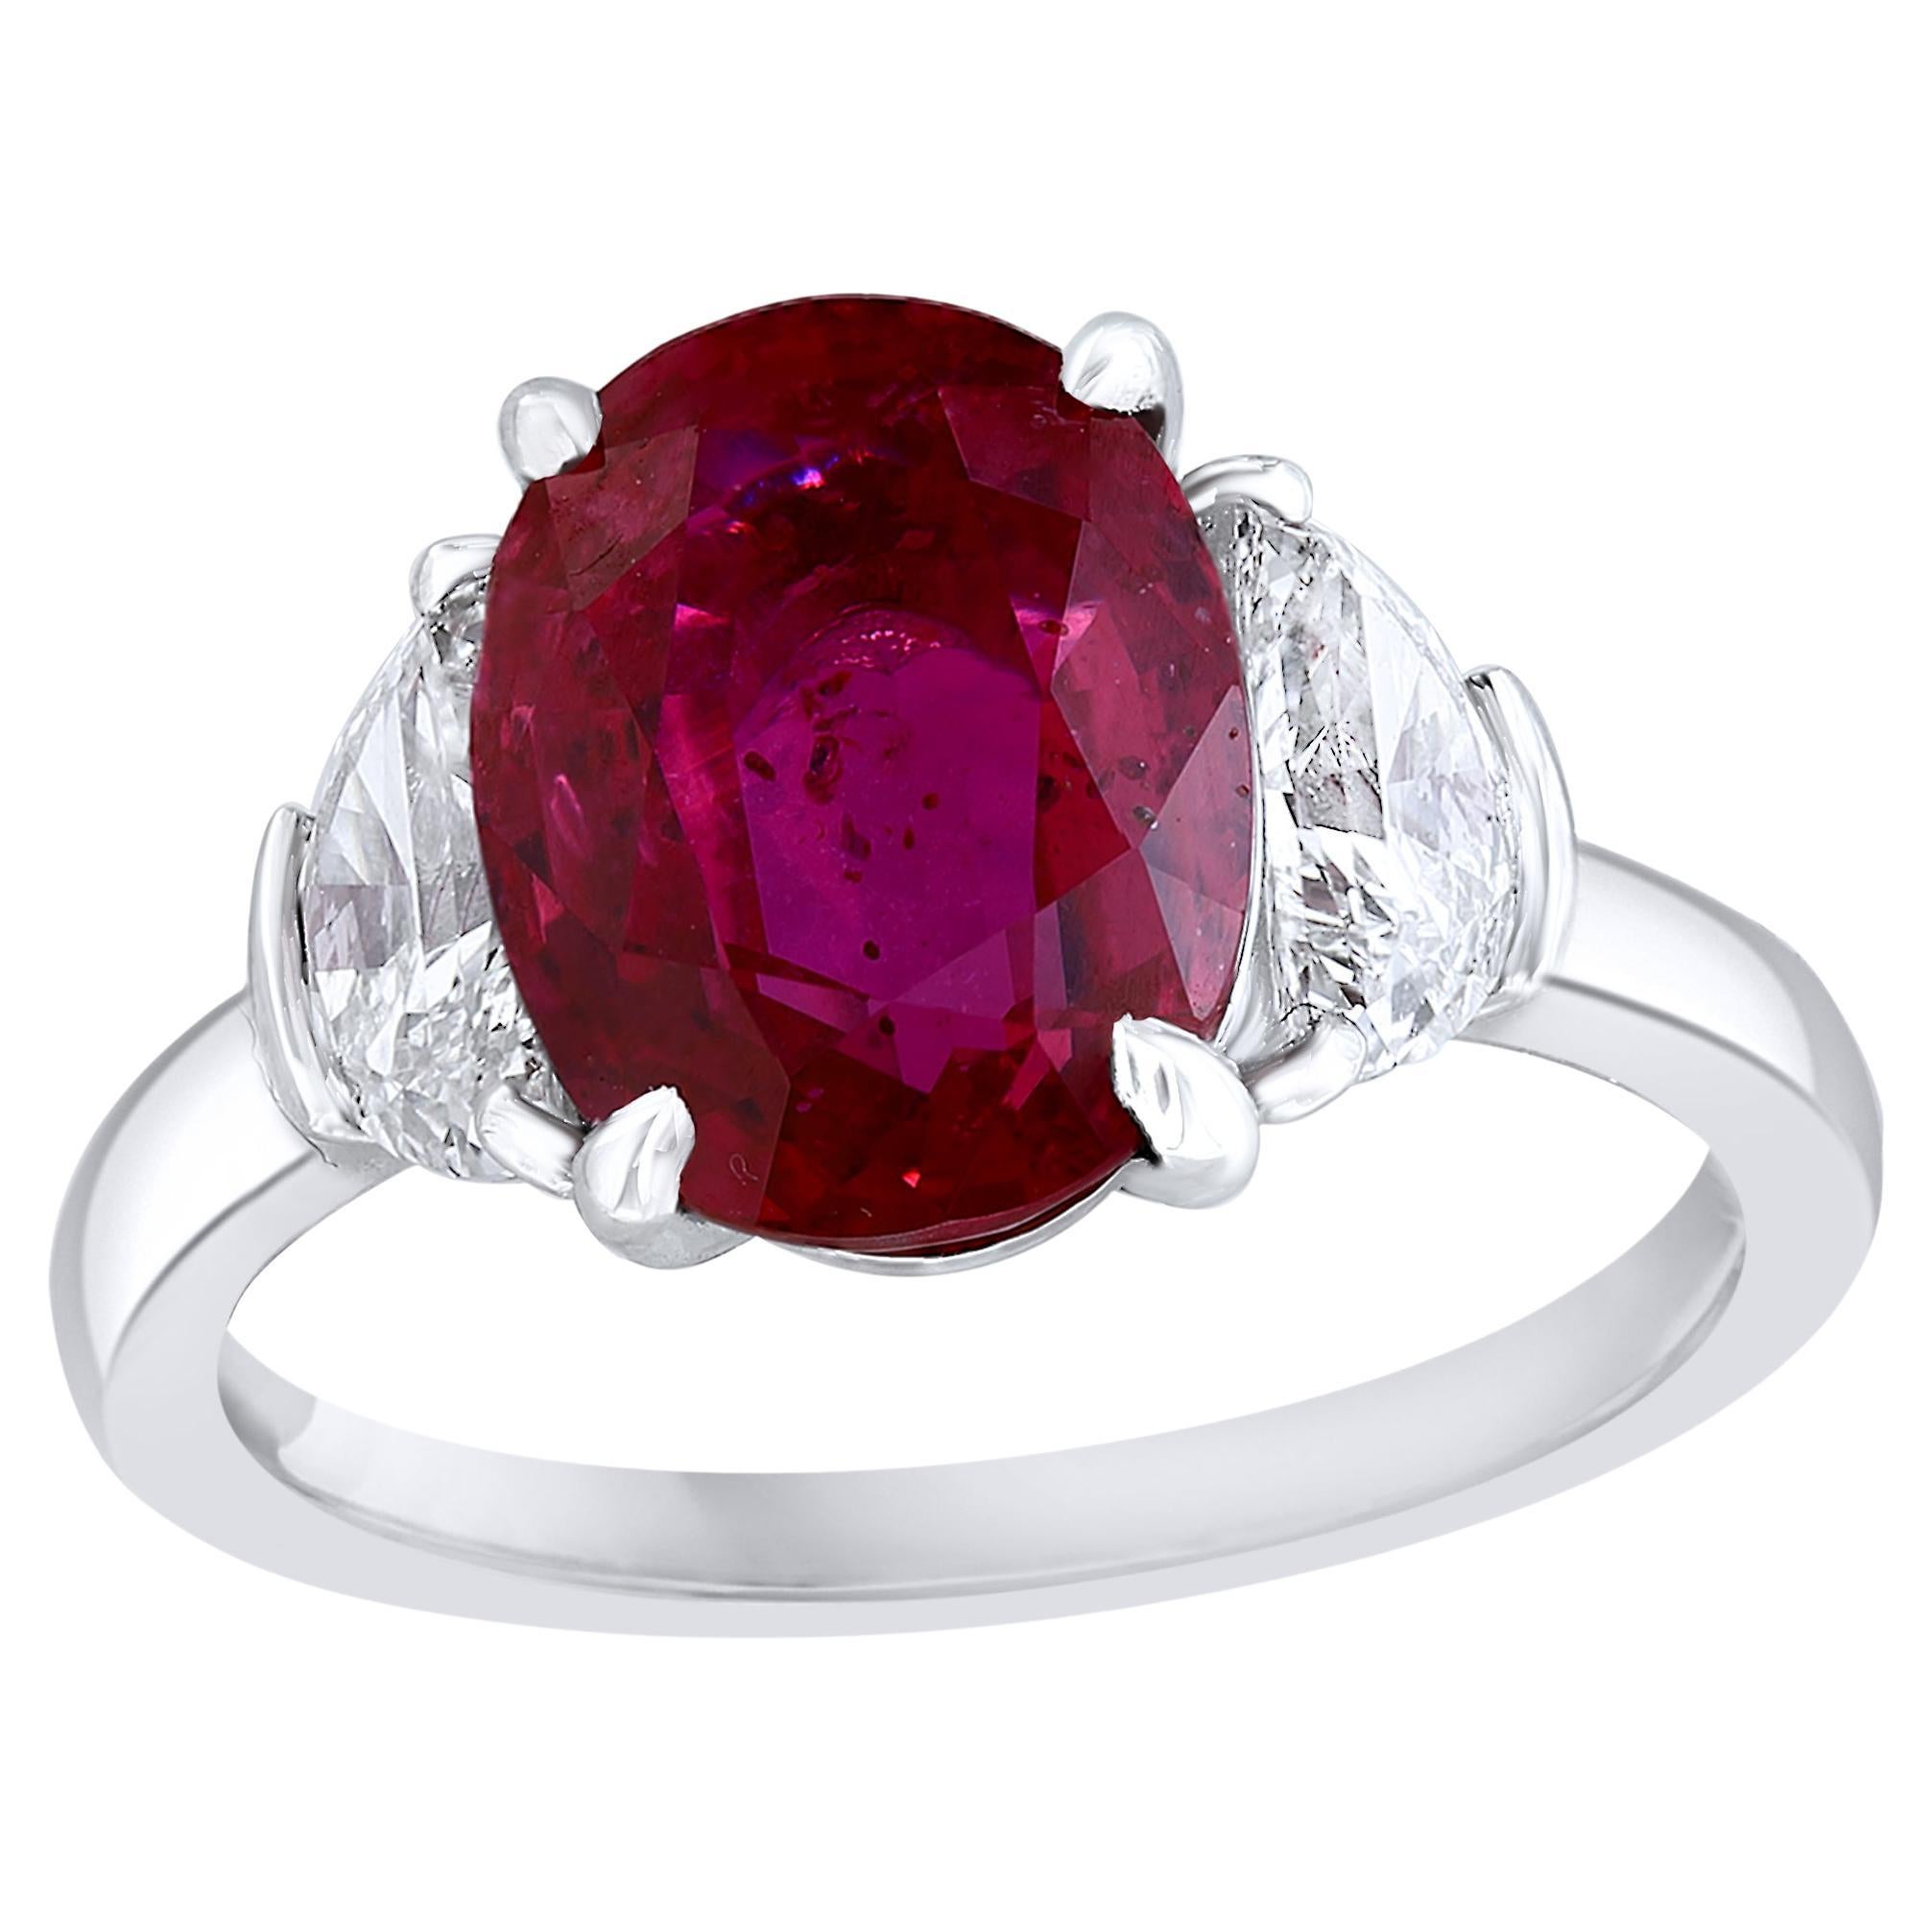 4.09 Carat Oval Cut Ruby and Diamond Three-Stone Engagement Ring in Platinum